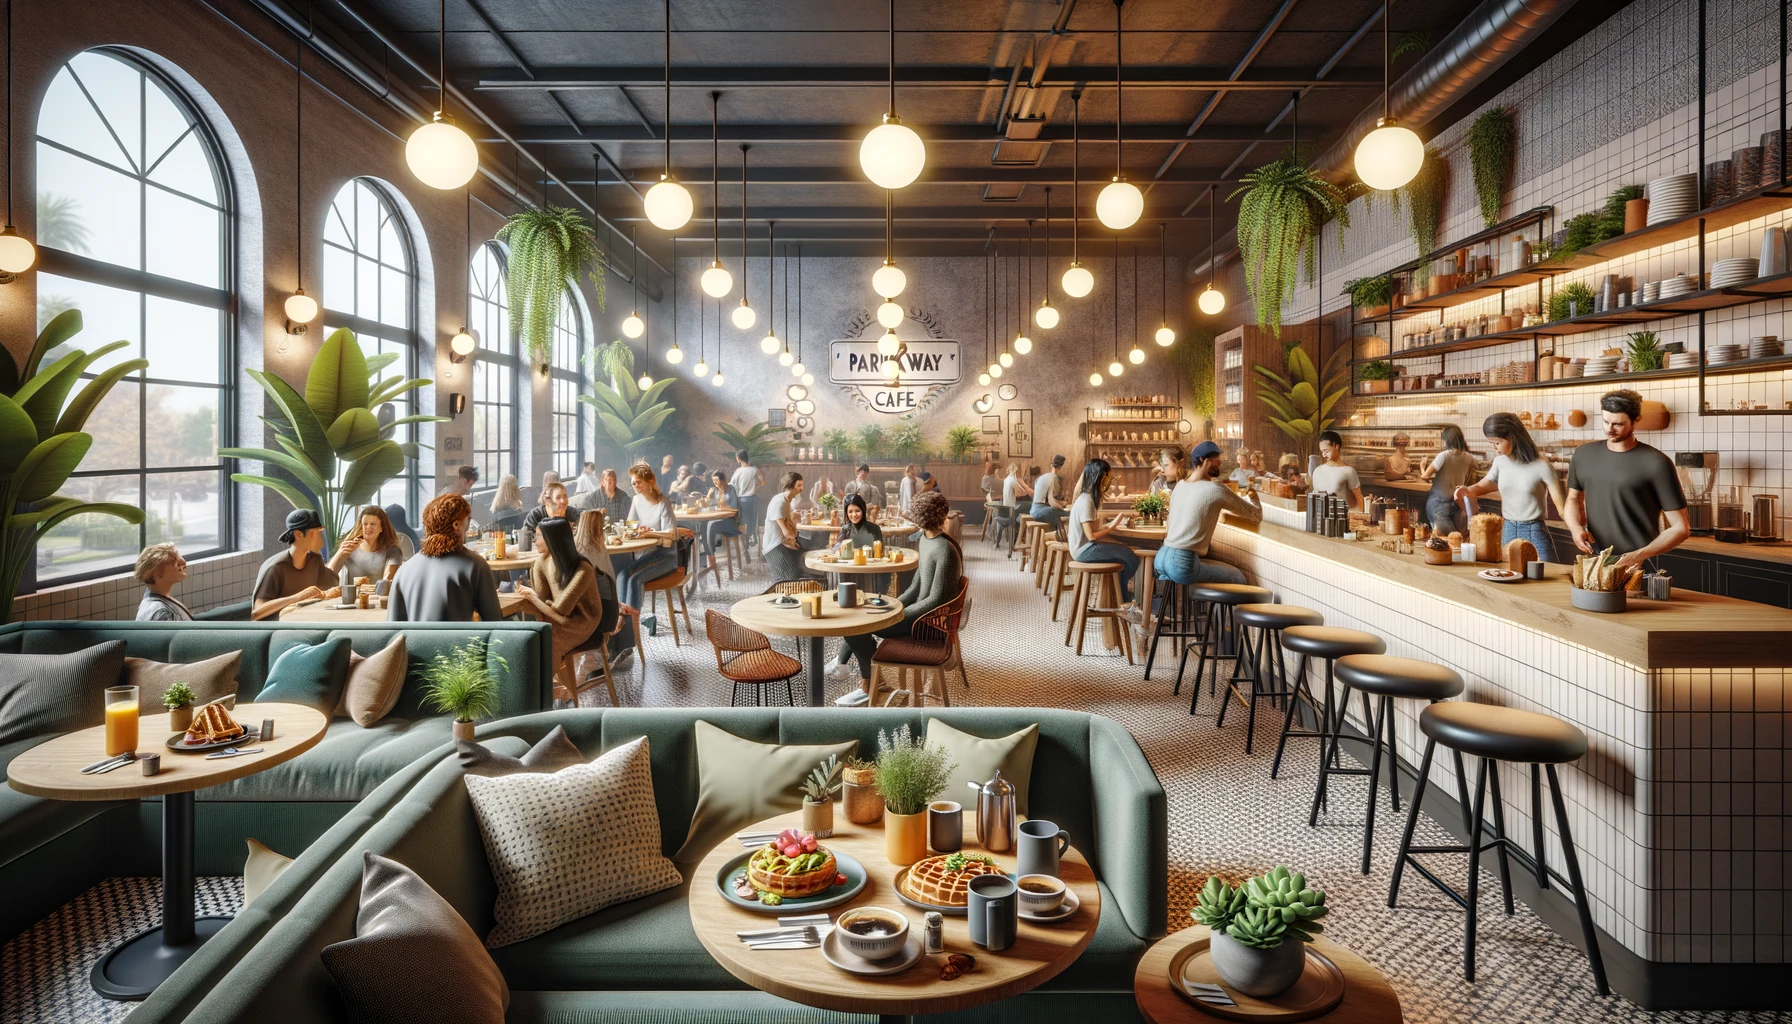 Photo-realistic depiction of the 'Parkway Café' interior, taking inspiration from the ambiance of the first image. The environment is welcoming with a blend of modern and rustic design elements. Seating is varied with cozy couches, bar stools, and cushioned chairs. Brunch dishes like avocado toast, waffles, and omelets are visible on tables, alongside steaming mugs of coffee. Plants are strategically placed for a touch of greenery, and the space is illuminated by pendant lights. Diverse customers of various descent and gender chat, read, and dine, creating a vibrant yet relaxed mood. Brunch Cafe